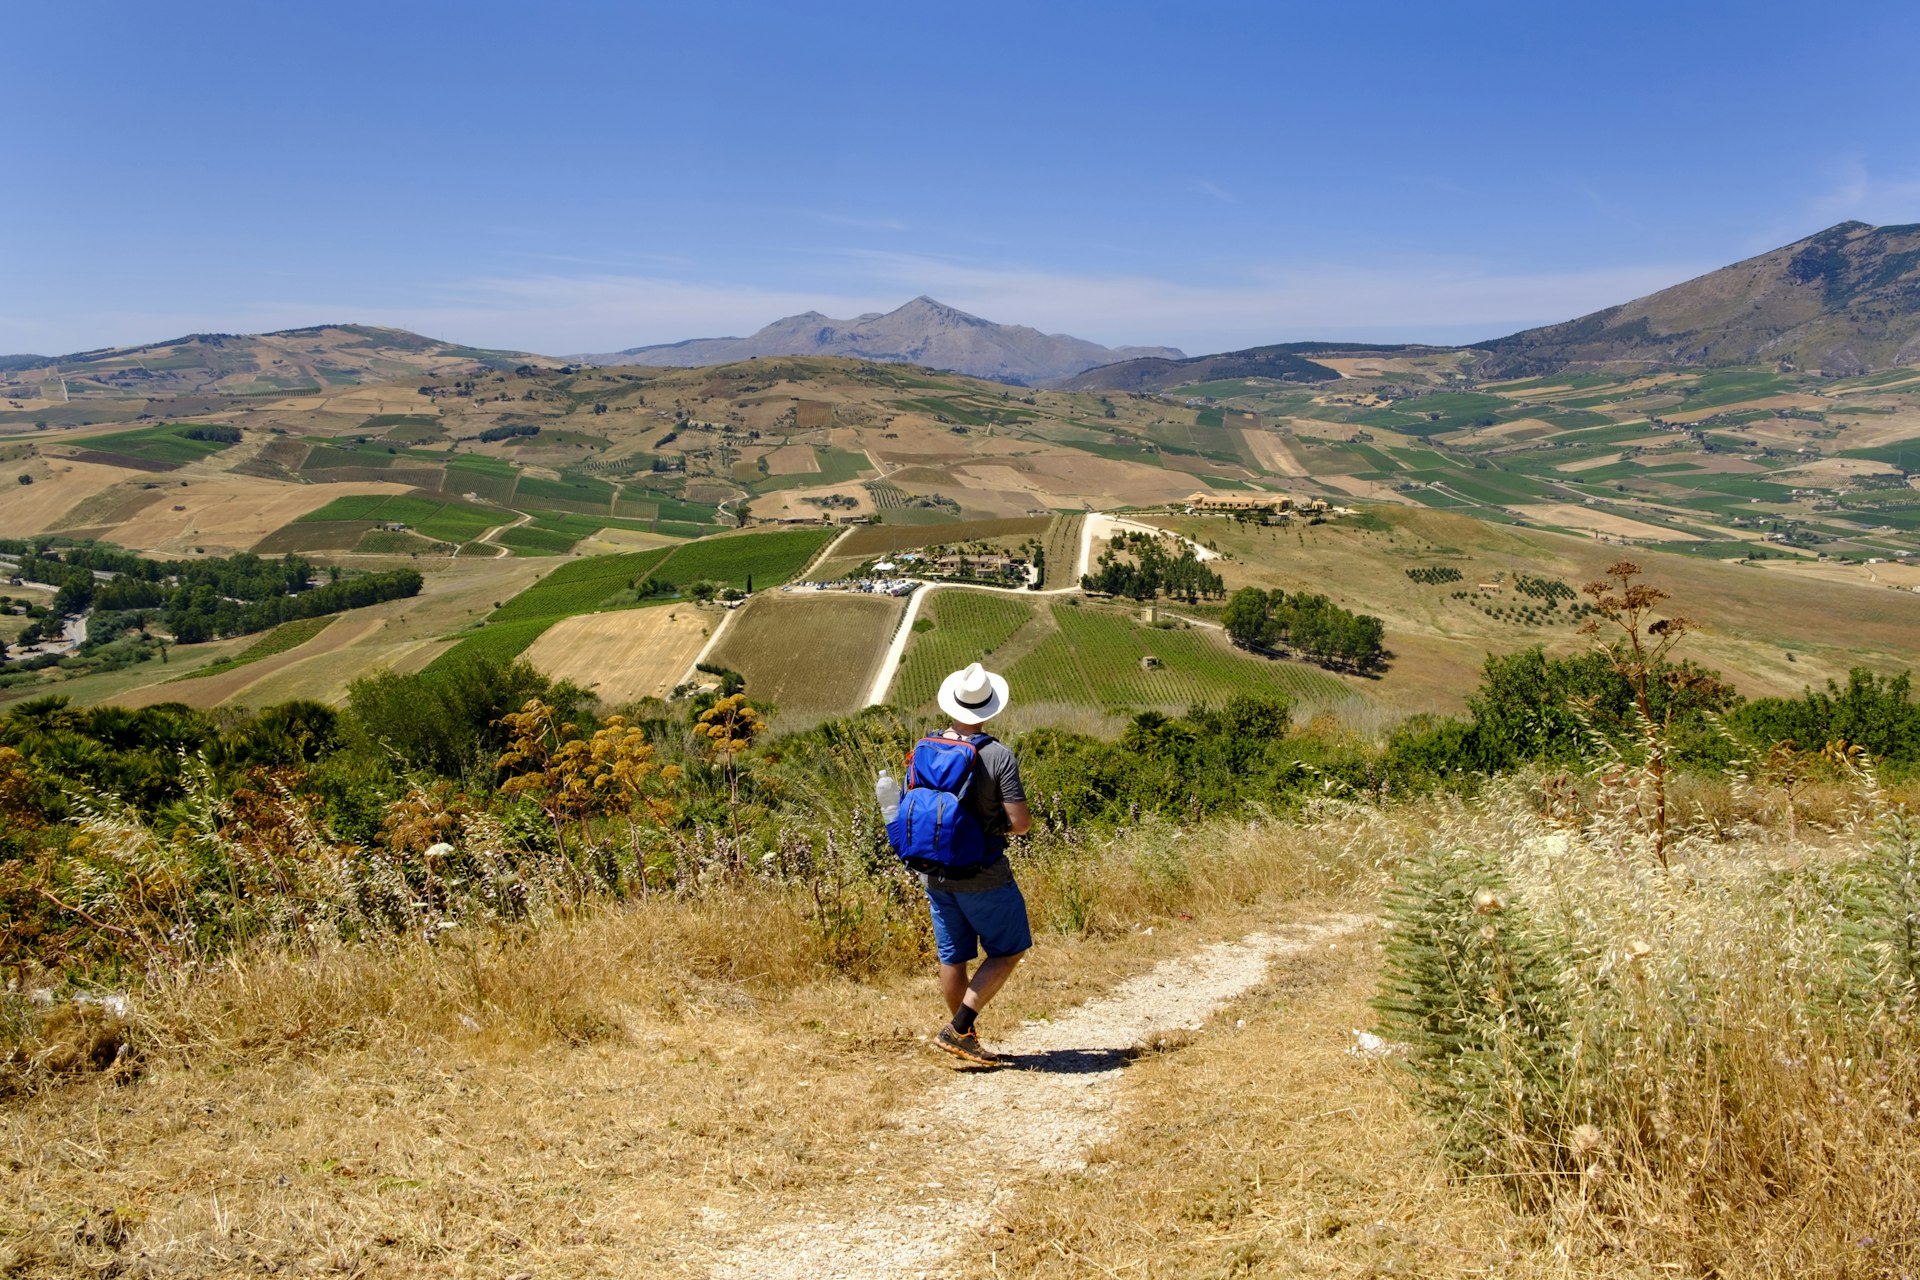 A person wearing a white hat walks on a trail overlooking countryside near Segesta, Italy